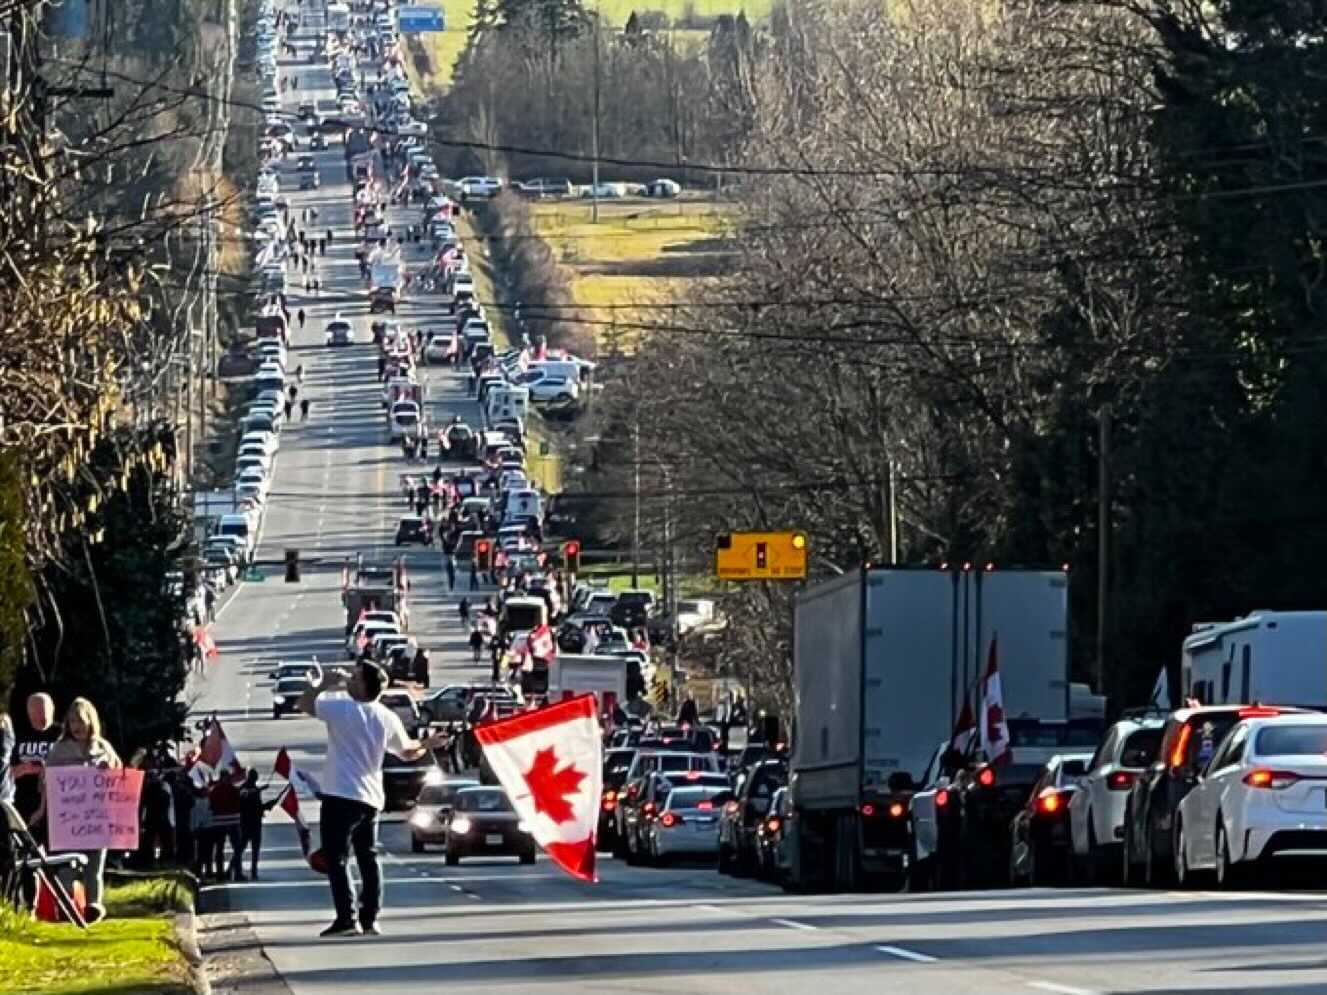 RCMP clear protest near Pacific Highway border crossing in B.C., make arrests